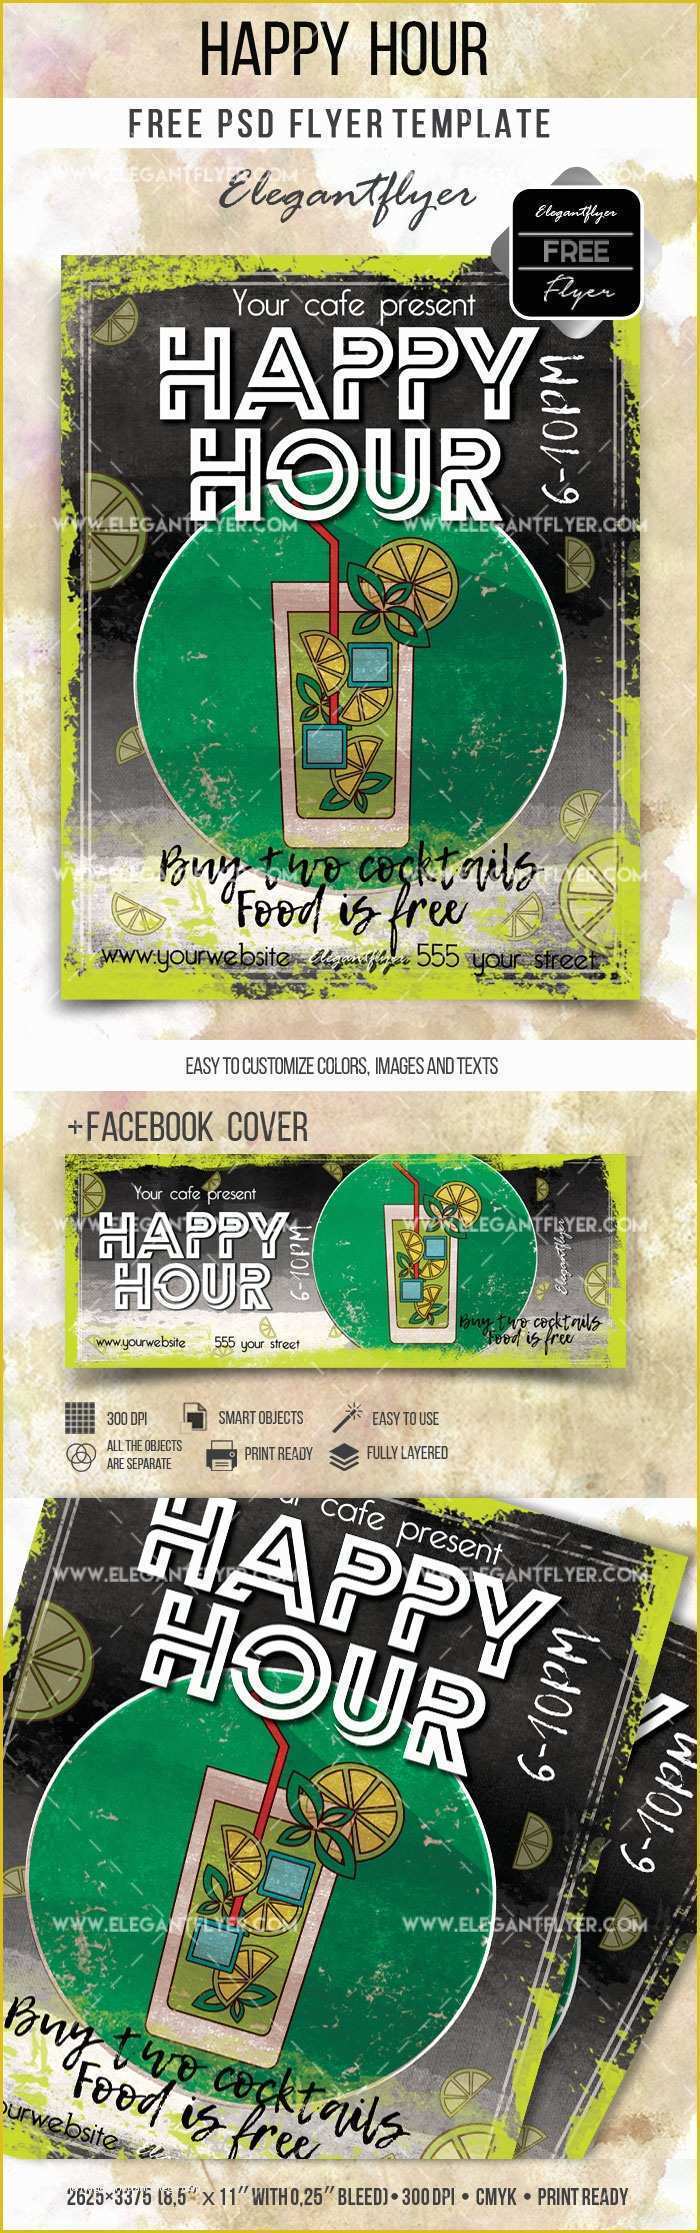 Happy Hour Flyer Template Free Of Happy Hour Flyer Free Psd Template – by Elegantflyer